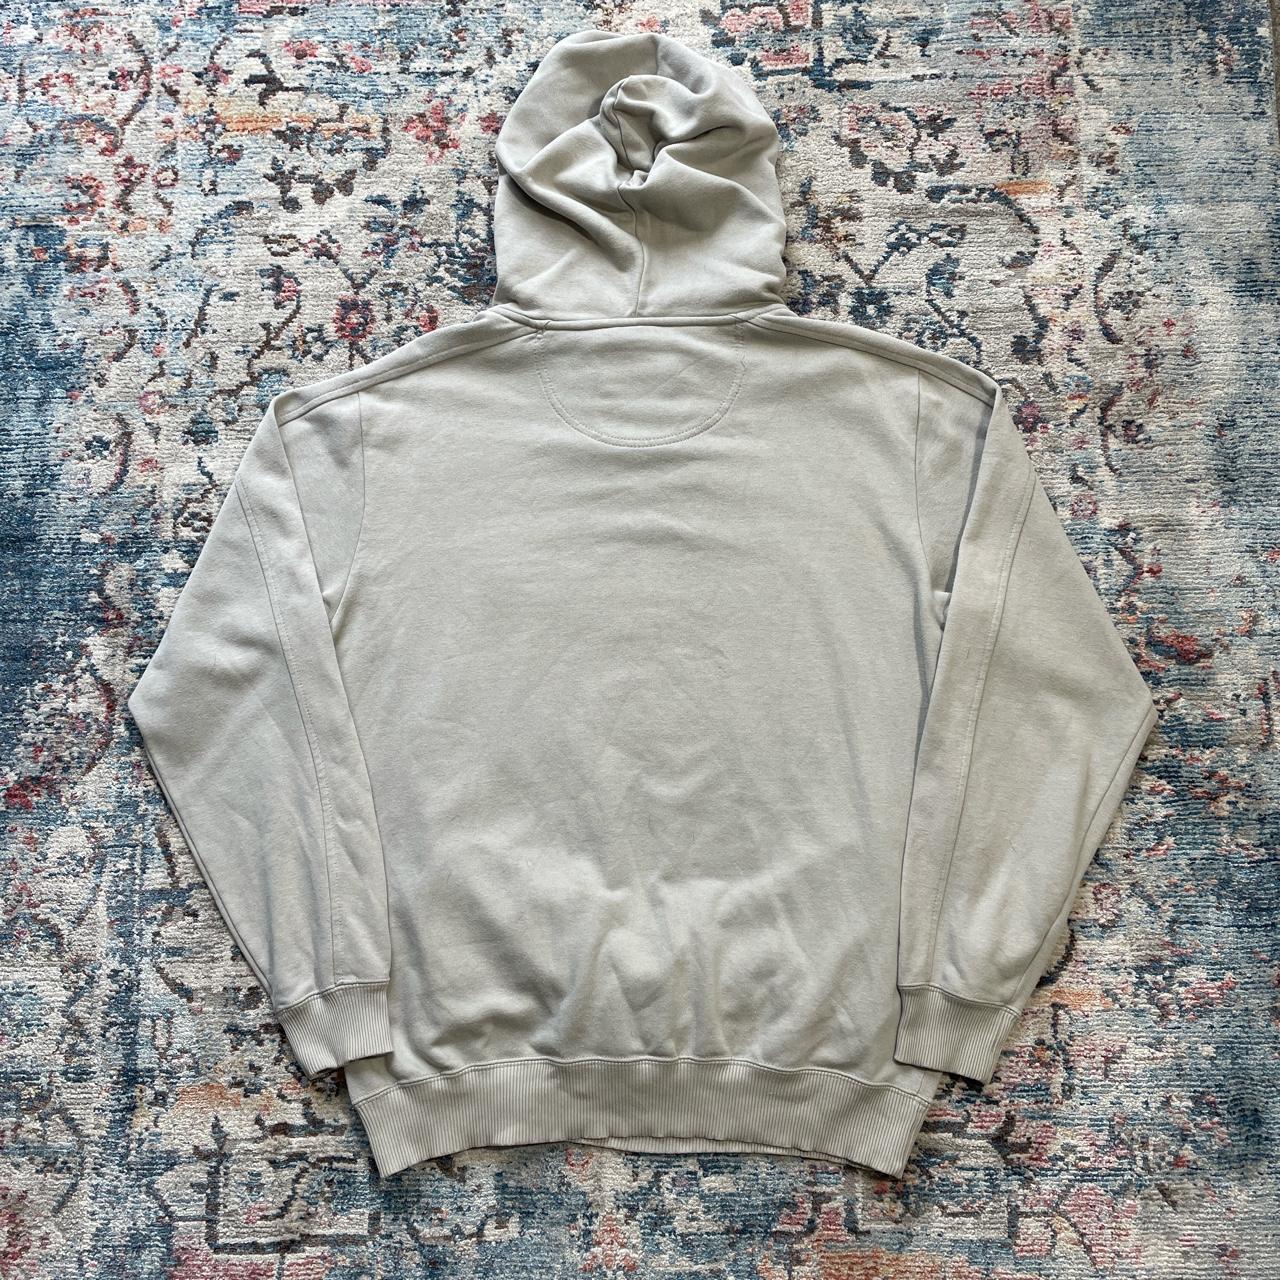 Vintage Champion Cream Spell Out Hoodie